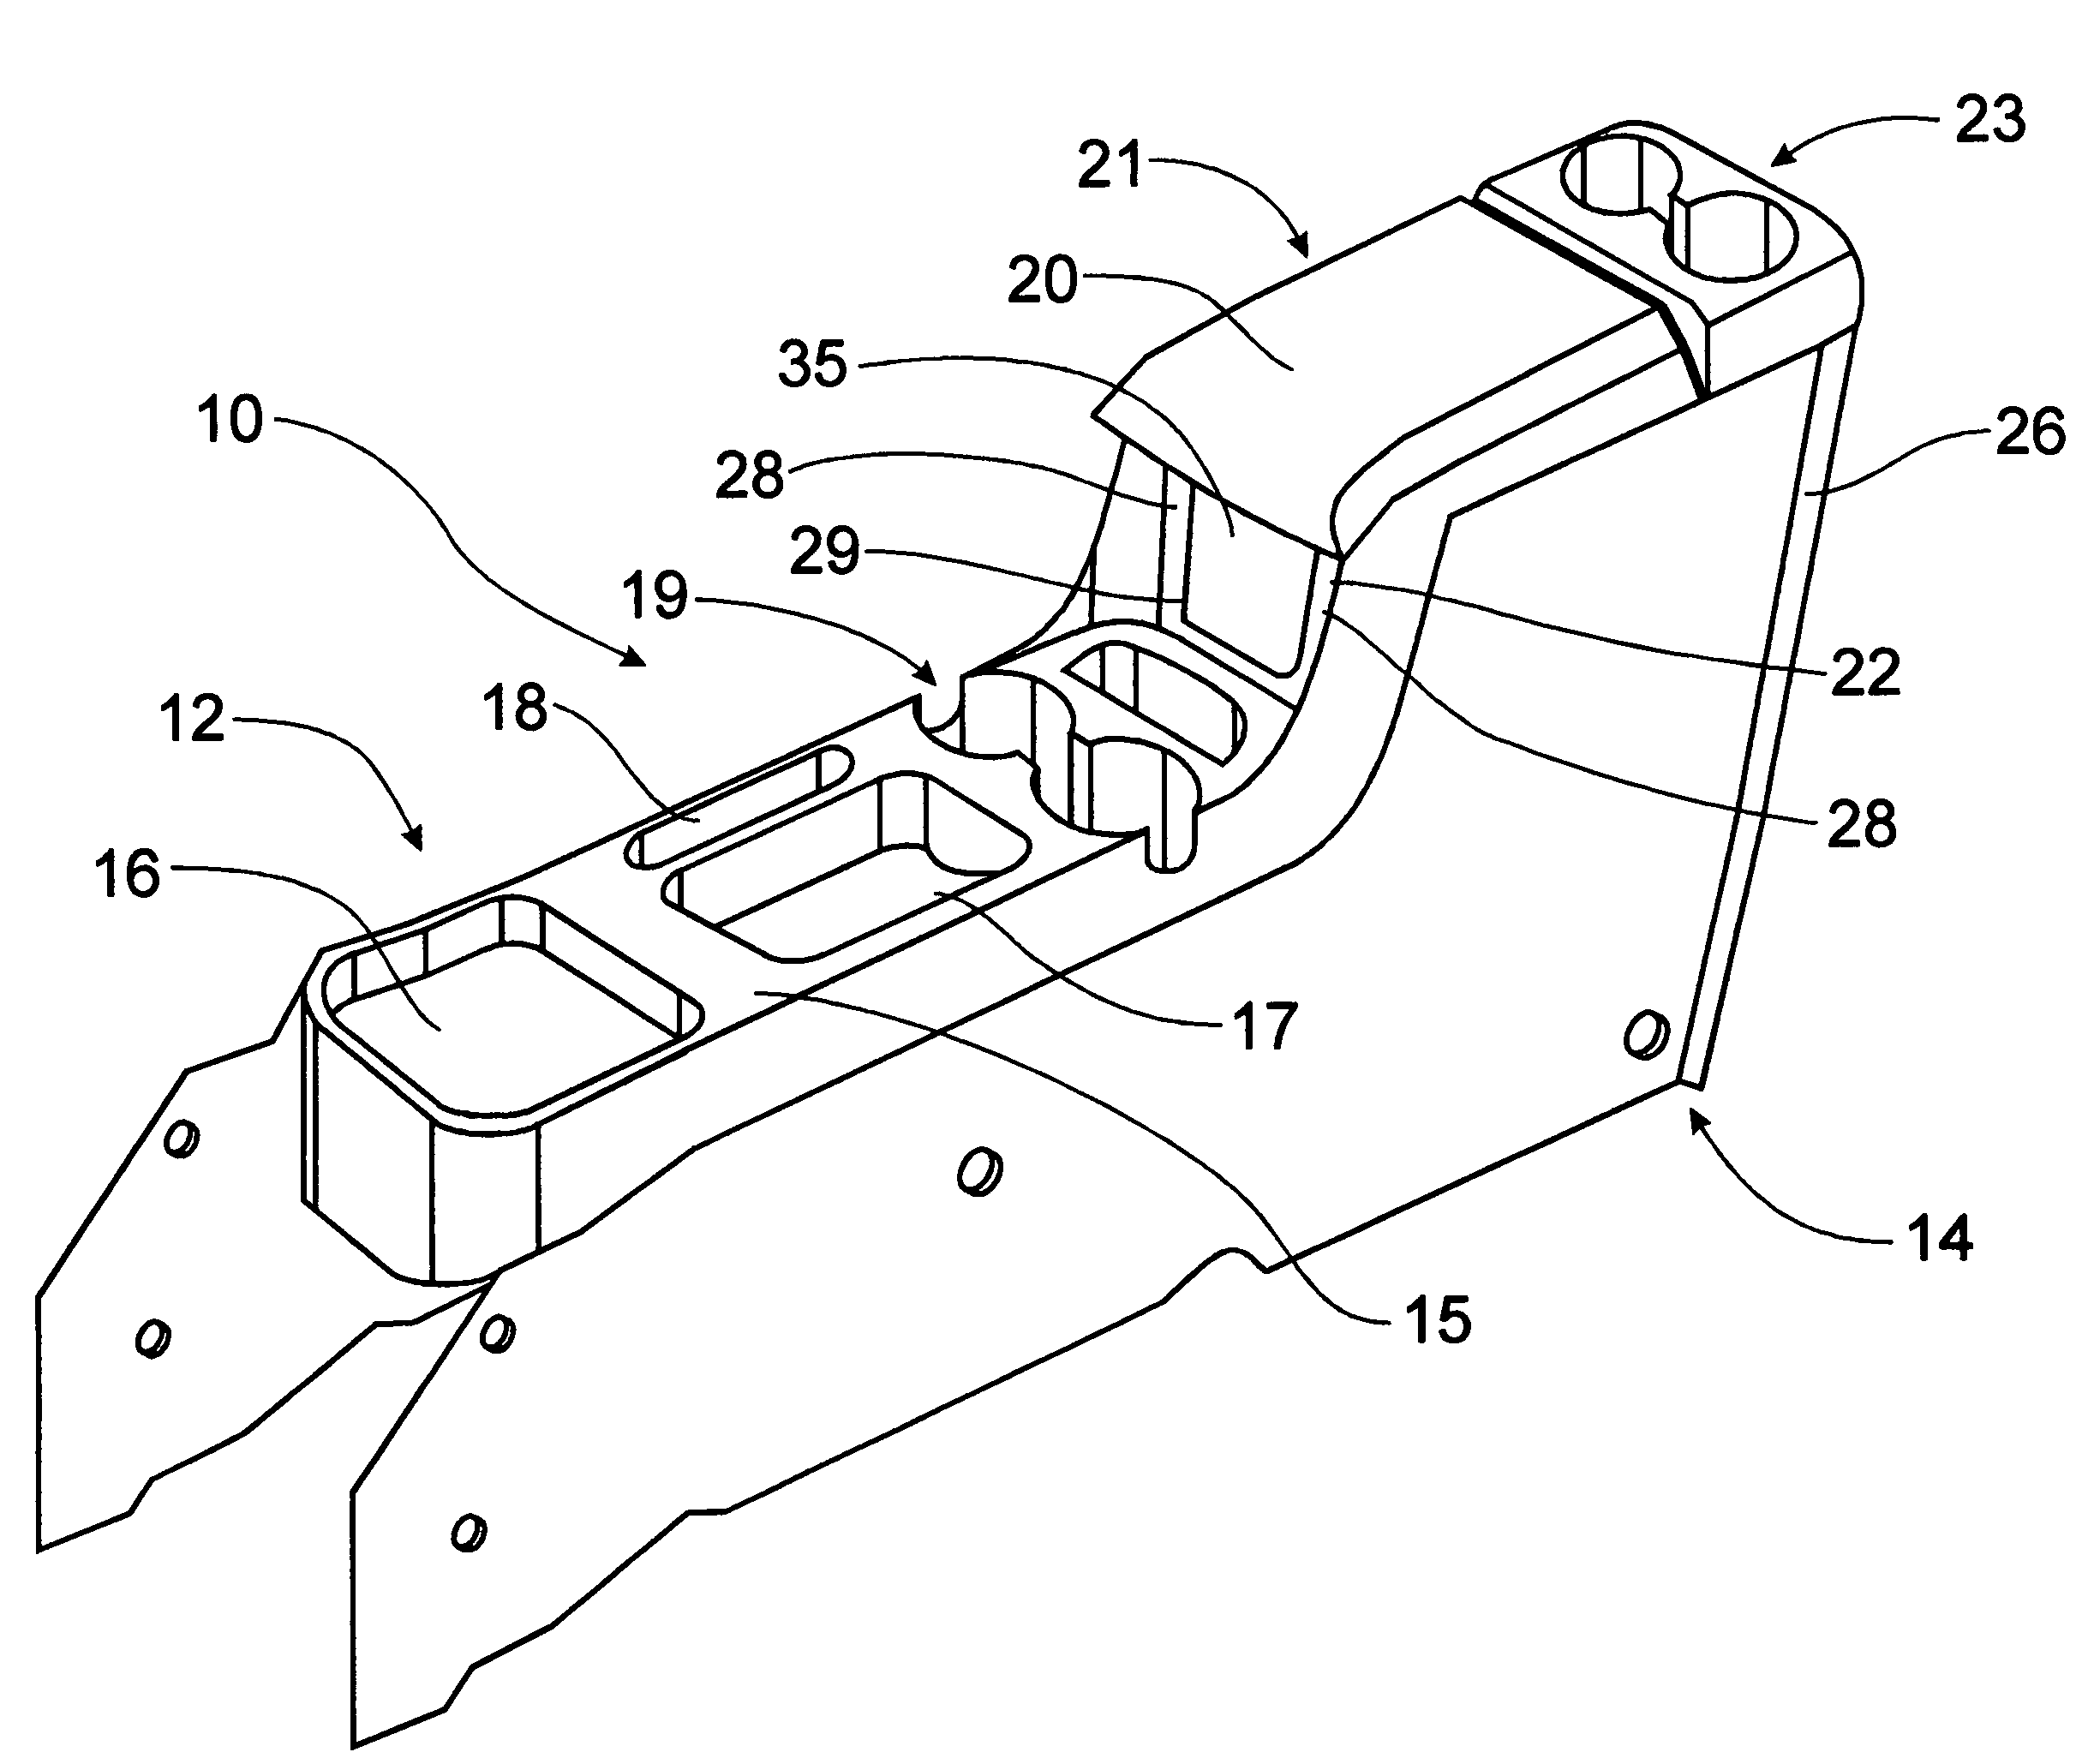 Automotive center console with open front face